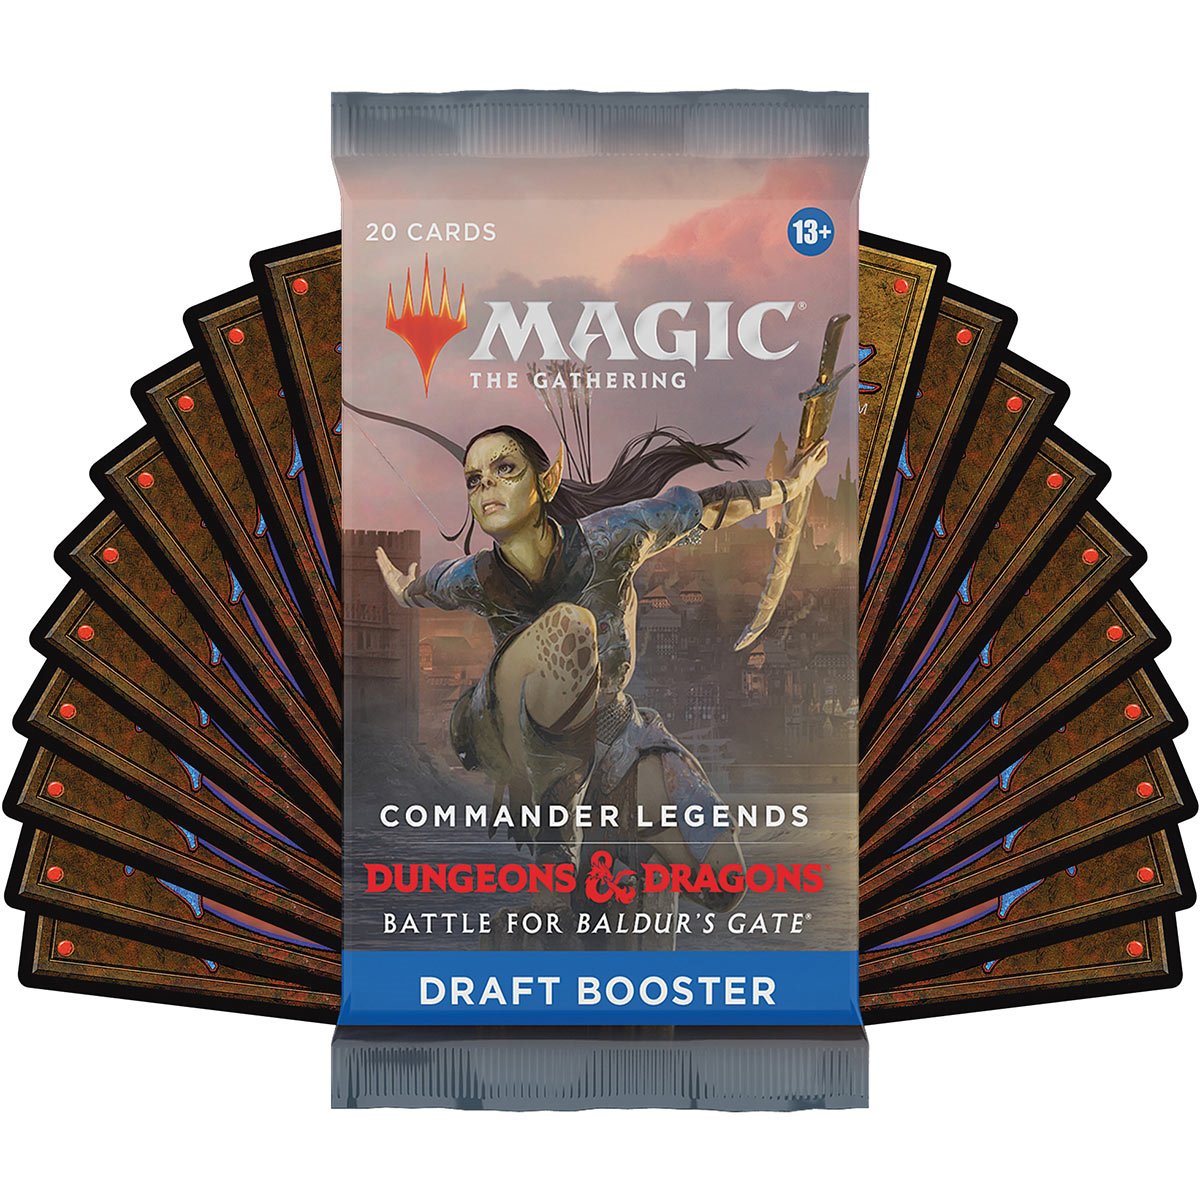 Magic the Gathering MTG Commander Legends Draft Booster Box Ships Now! 